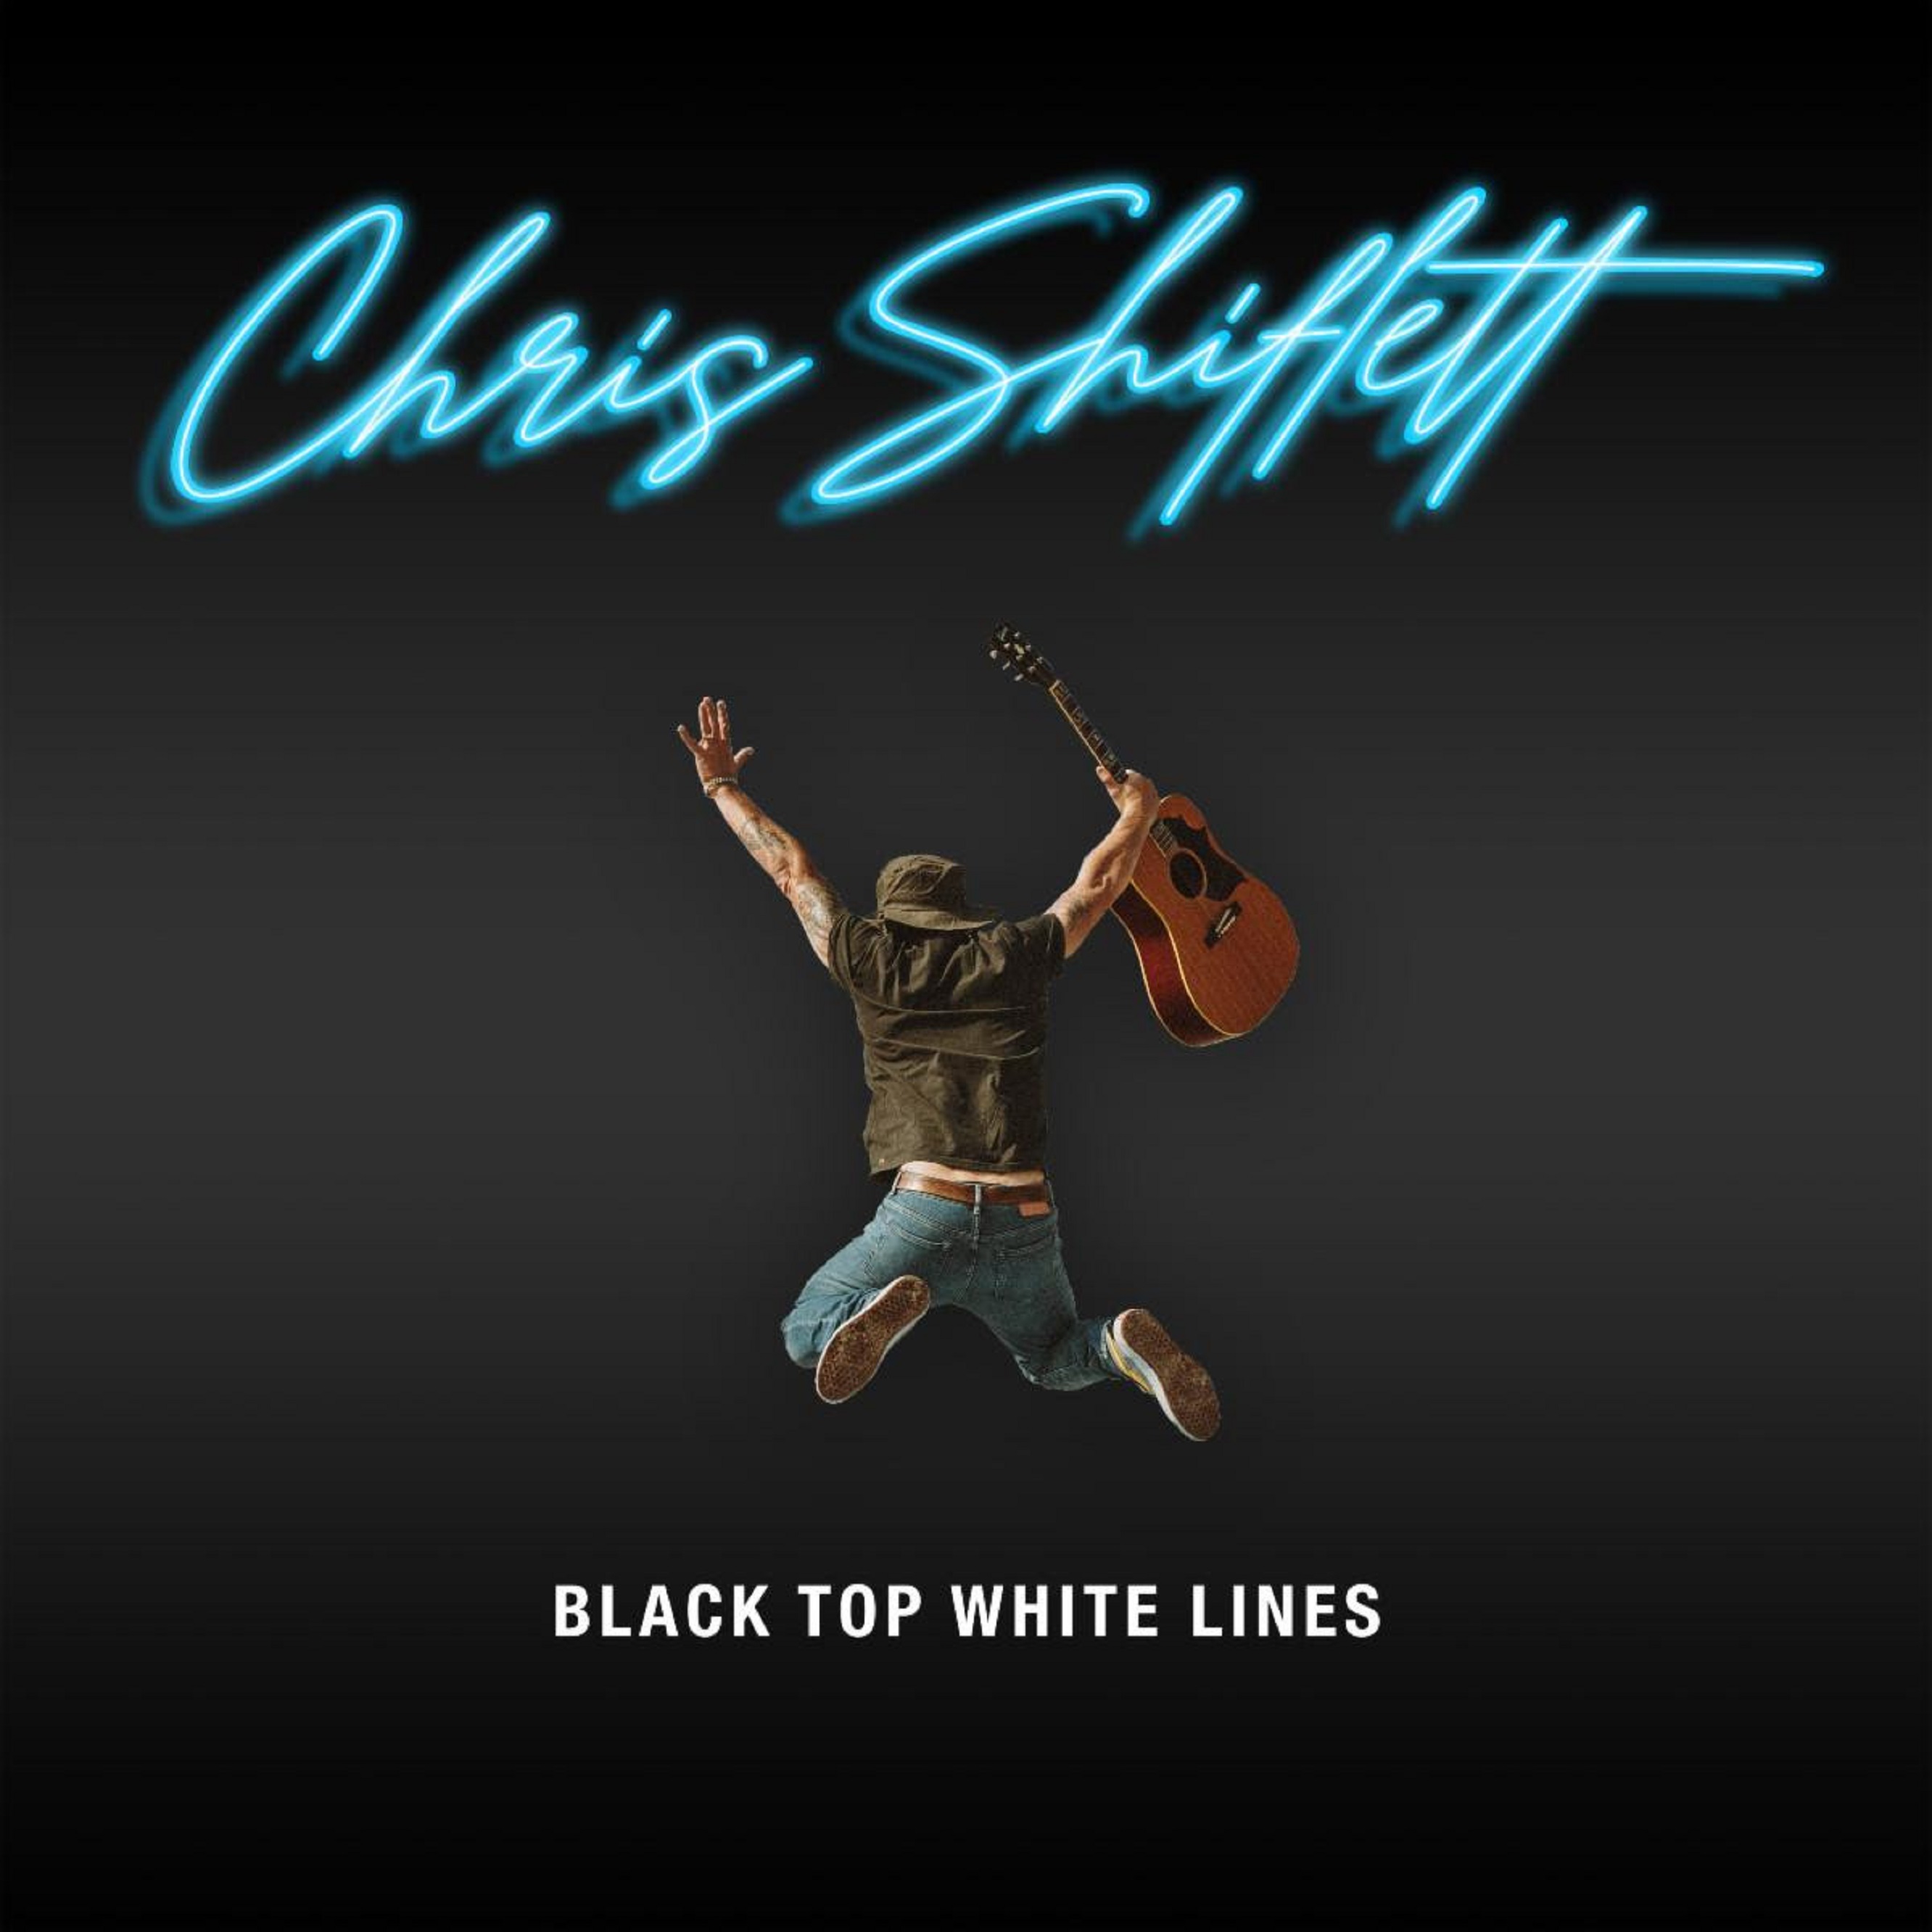 Chris Shiflett’s New Single “Black Top White Lines" Out Now